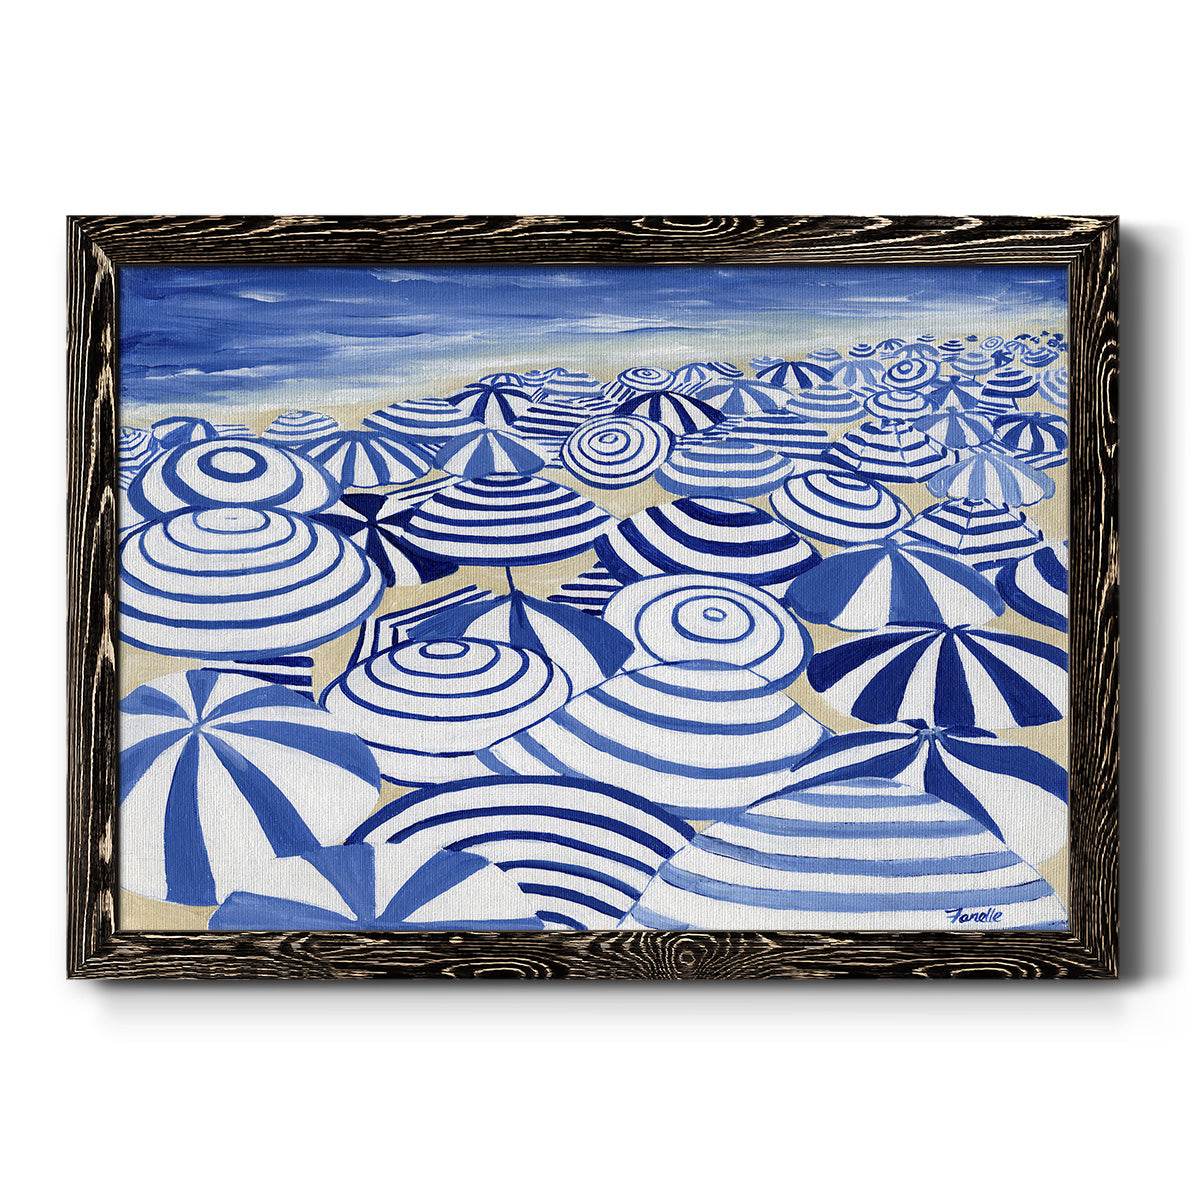 Candy Bowl Prussian Blue-Premium Framed Canvas - Ready to Hang